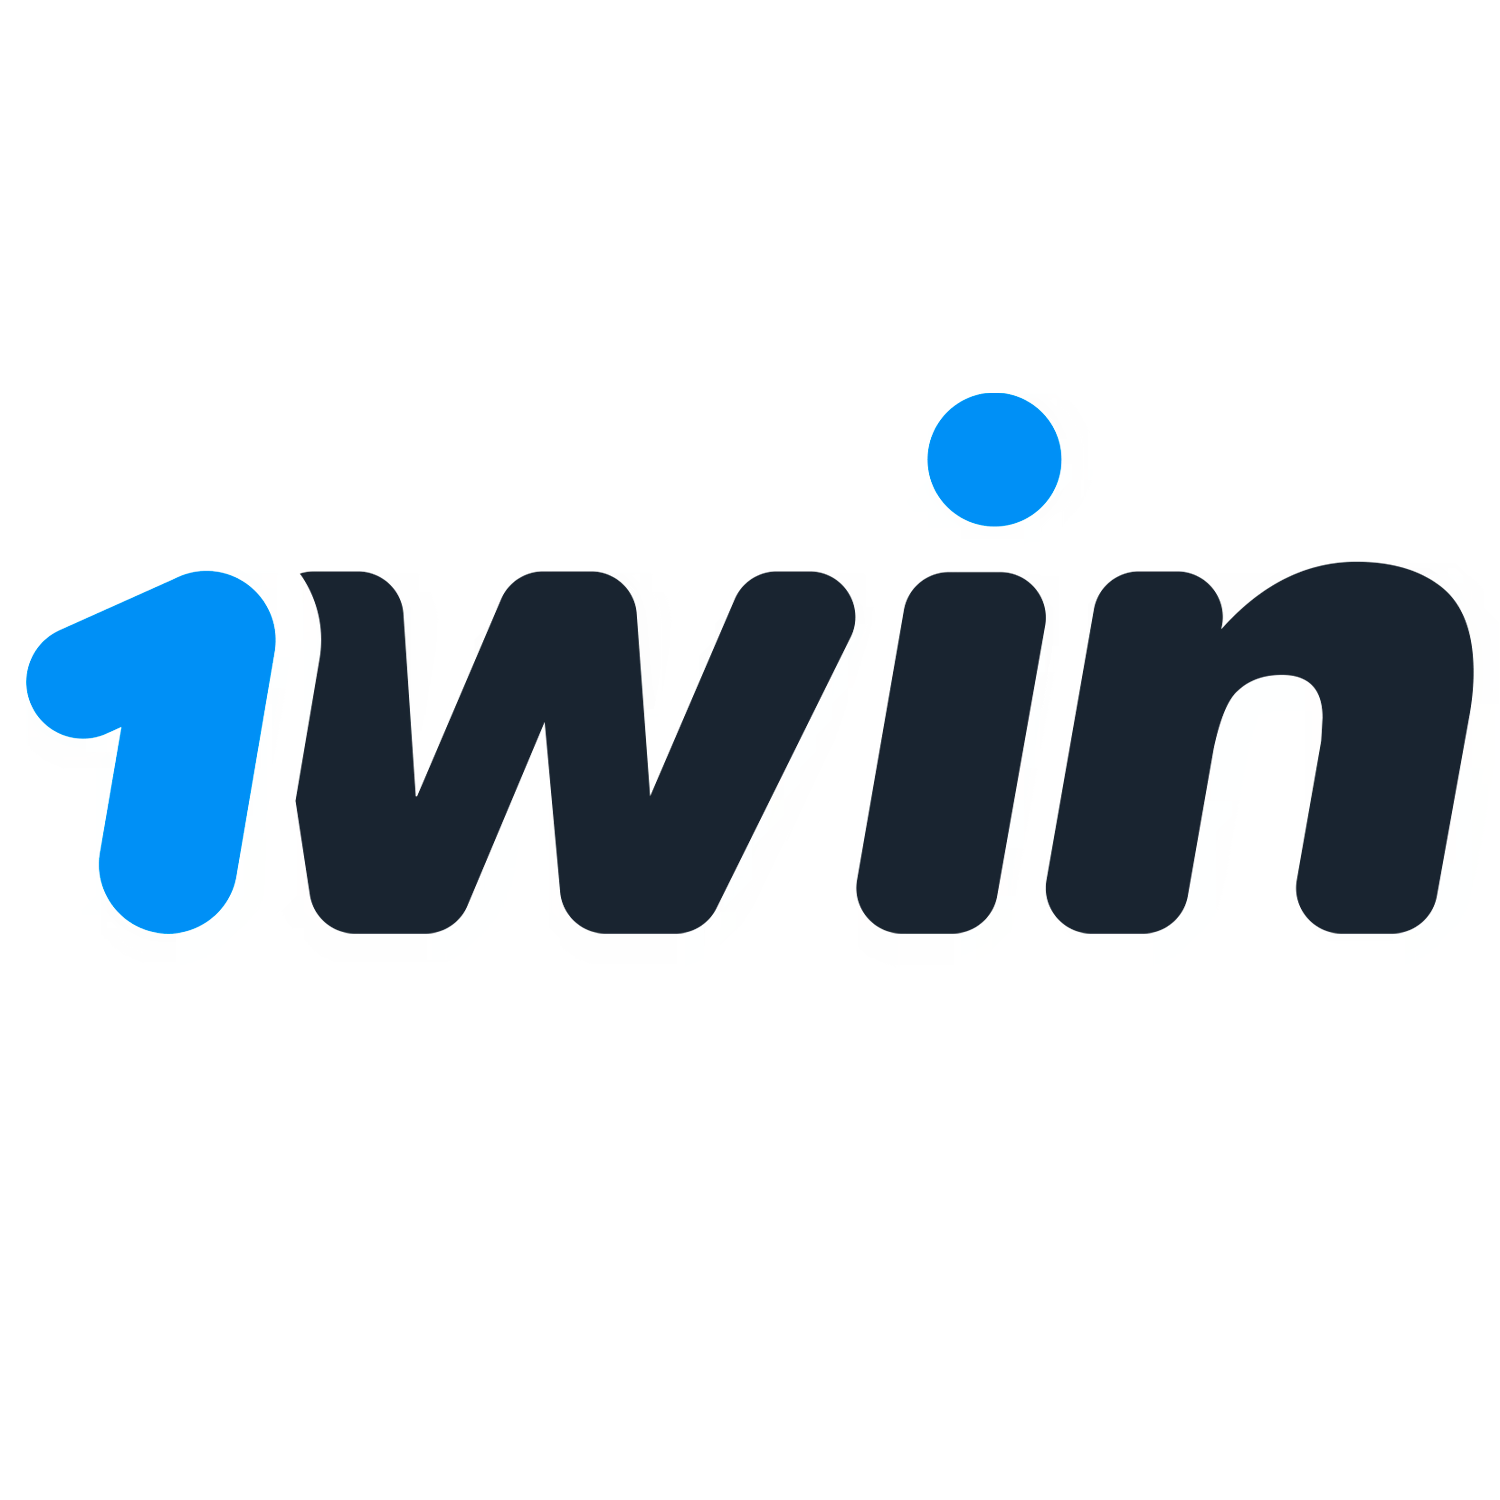 1win is a betting platfrom and an online casino for Indian punters.